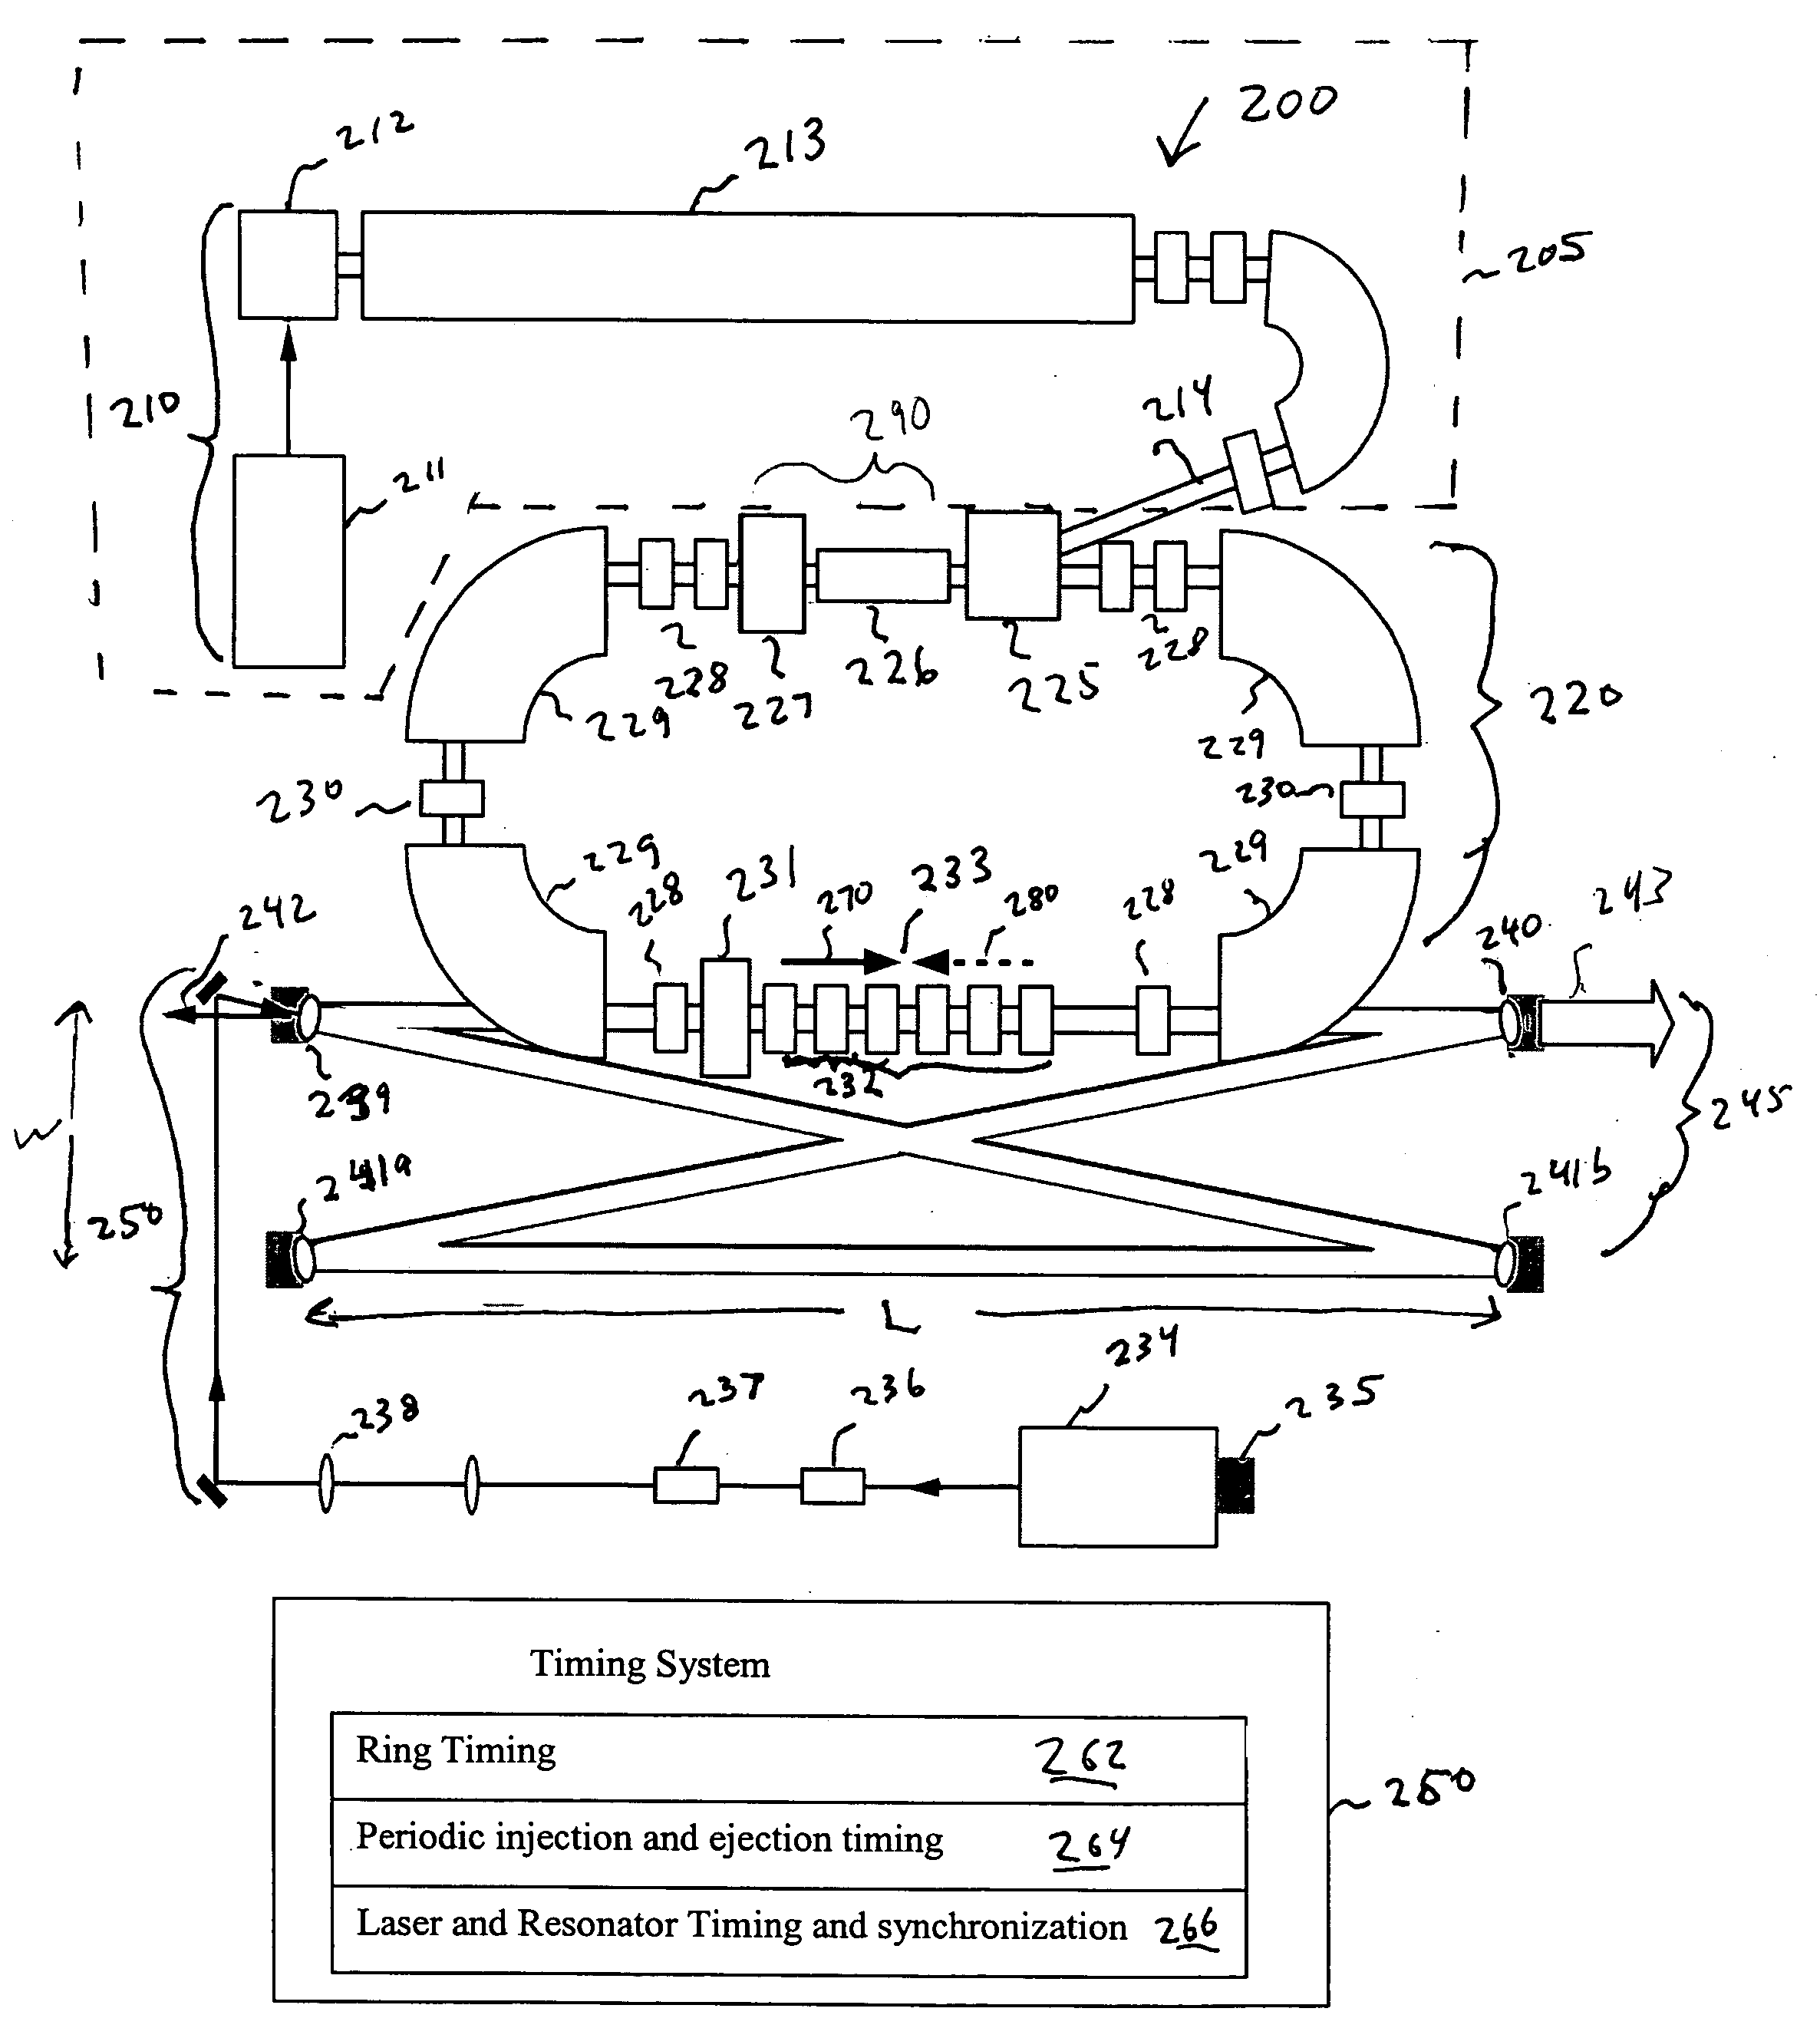 Apparatus, system, and method for high flux, compact compton x-ray source